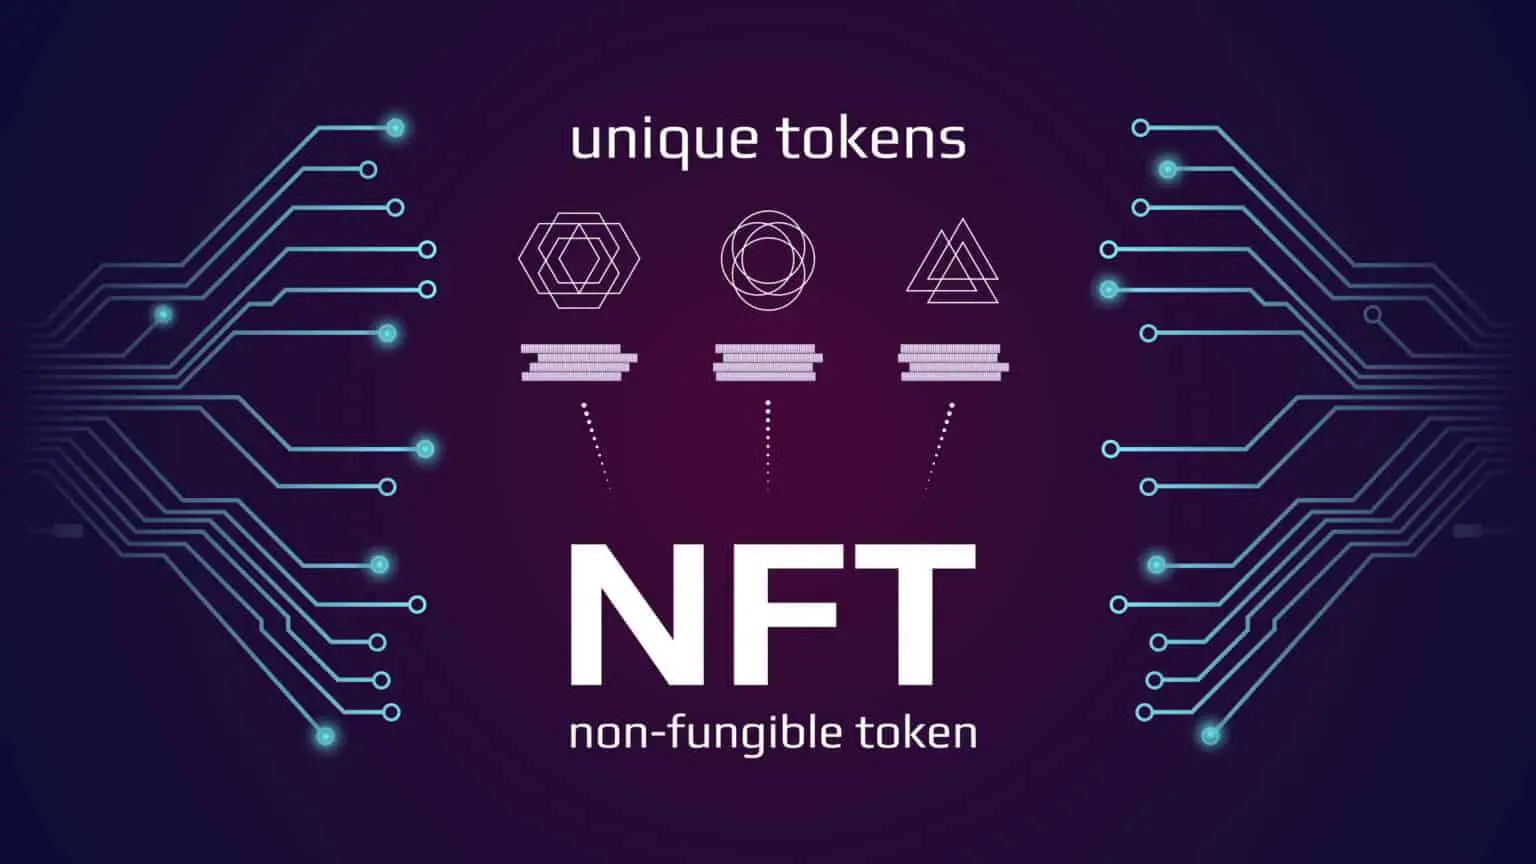 whats nfts stand for